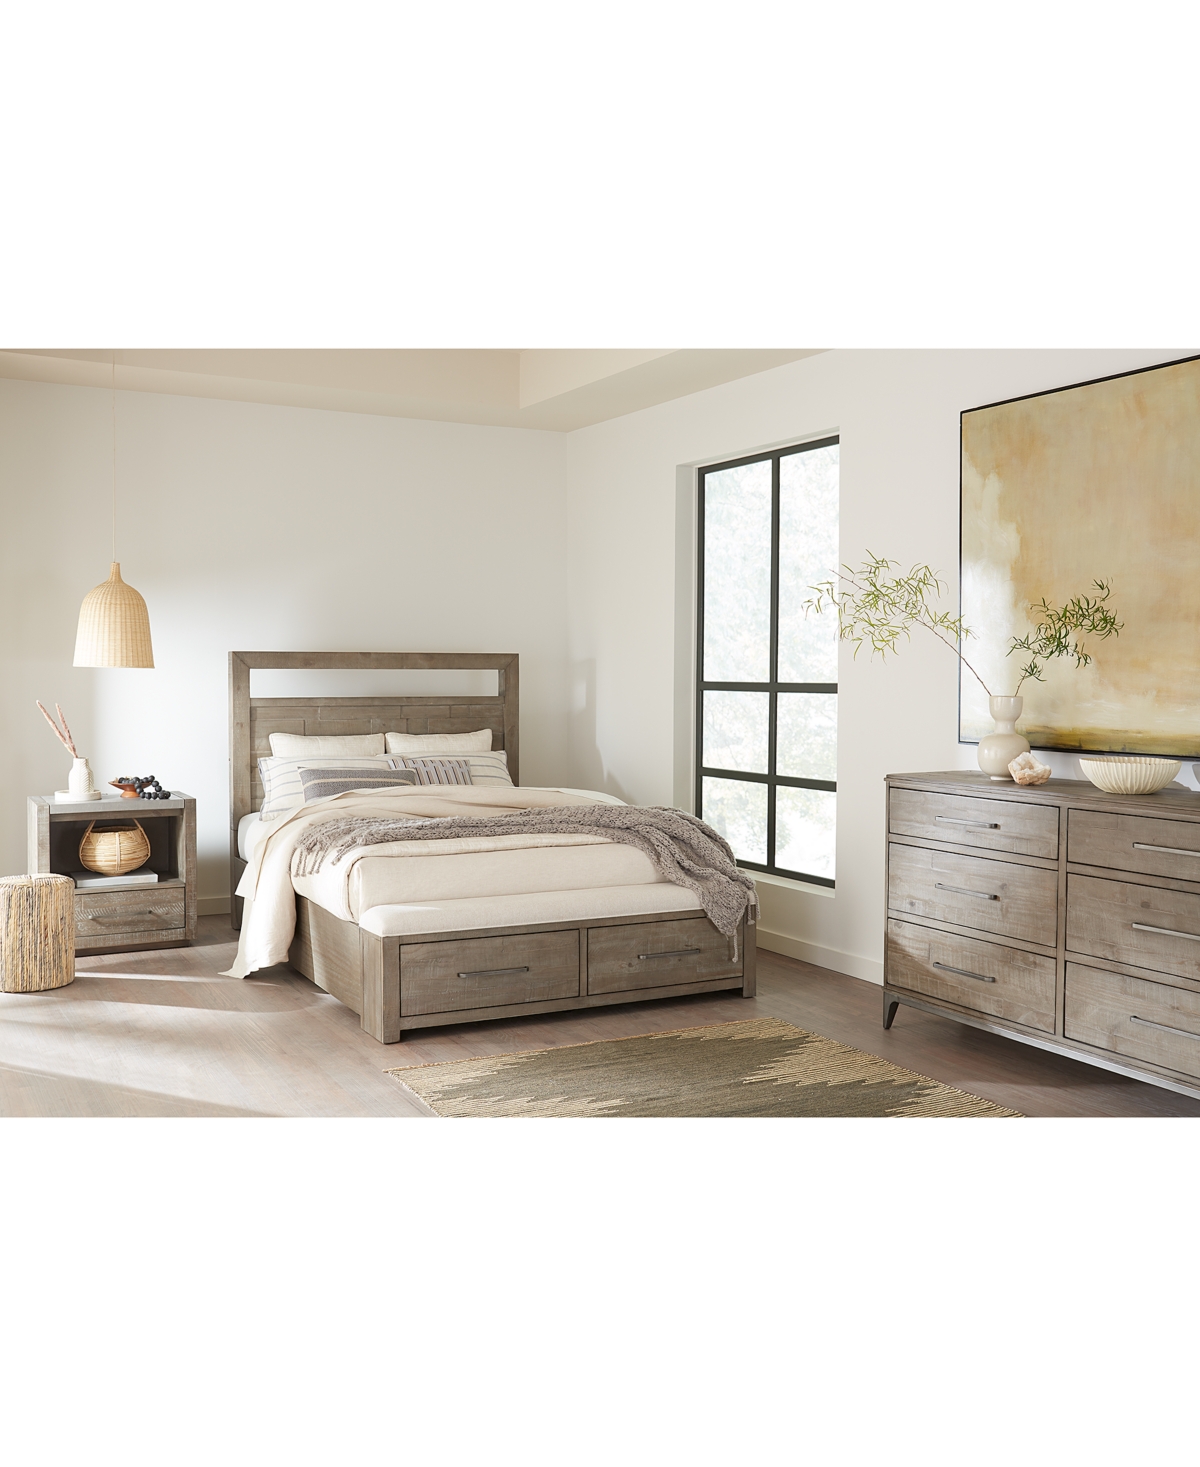 Furniture Intrigue Queen Bed